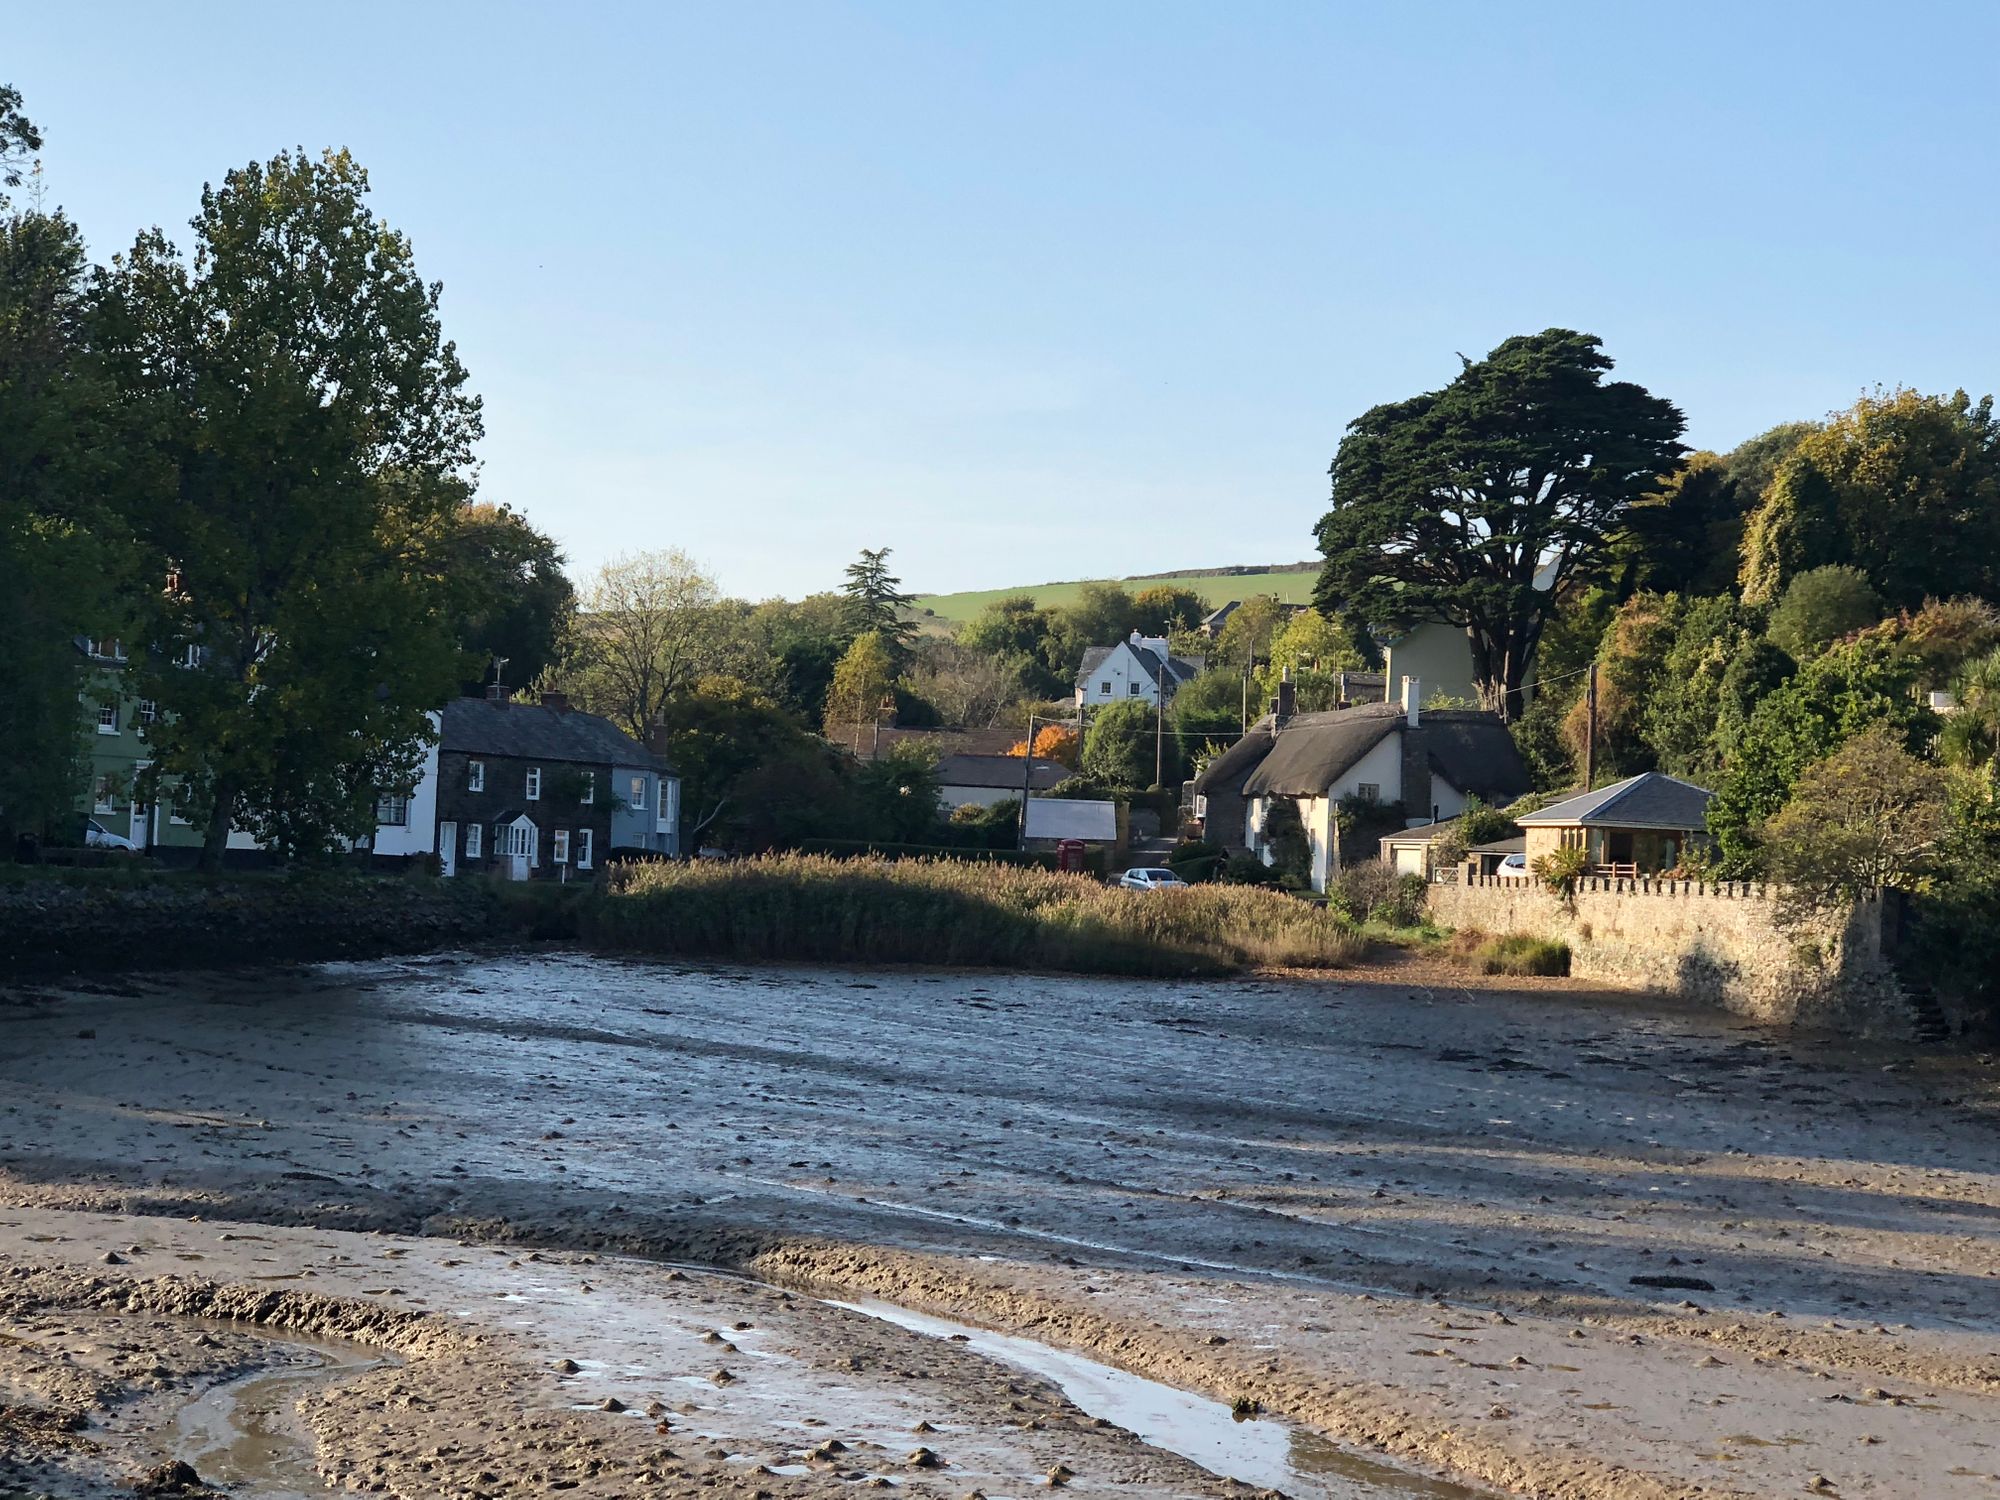 Pictures of Batson Creek and Salcombe